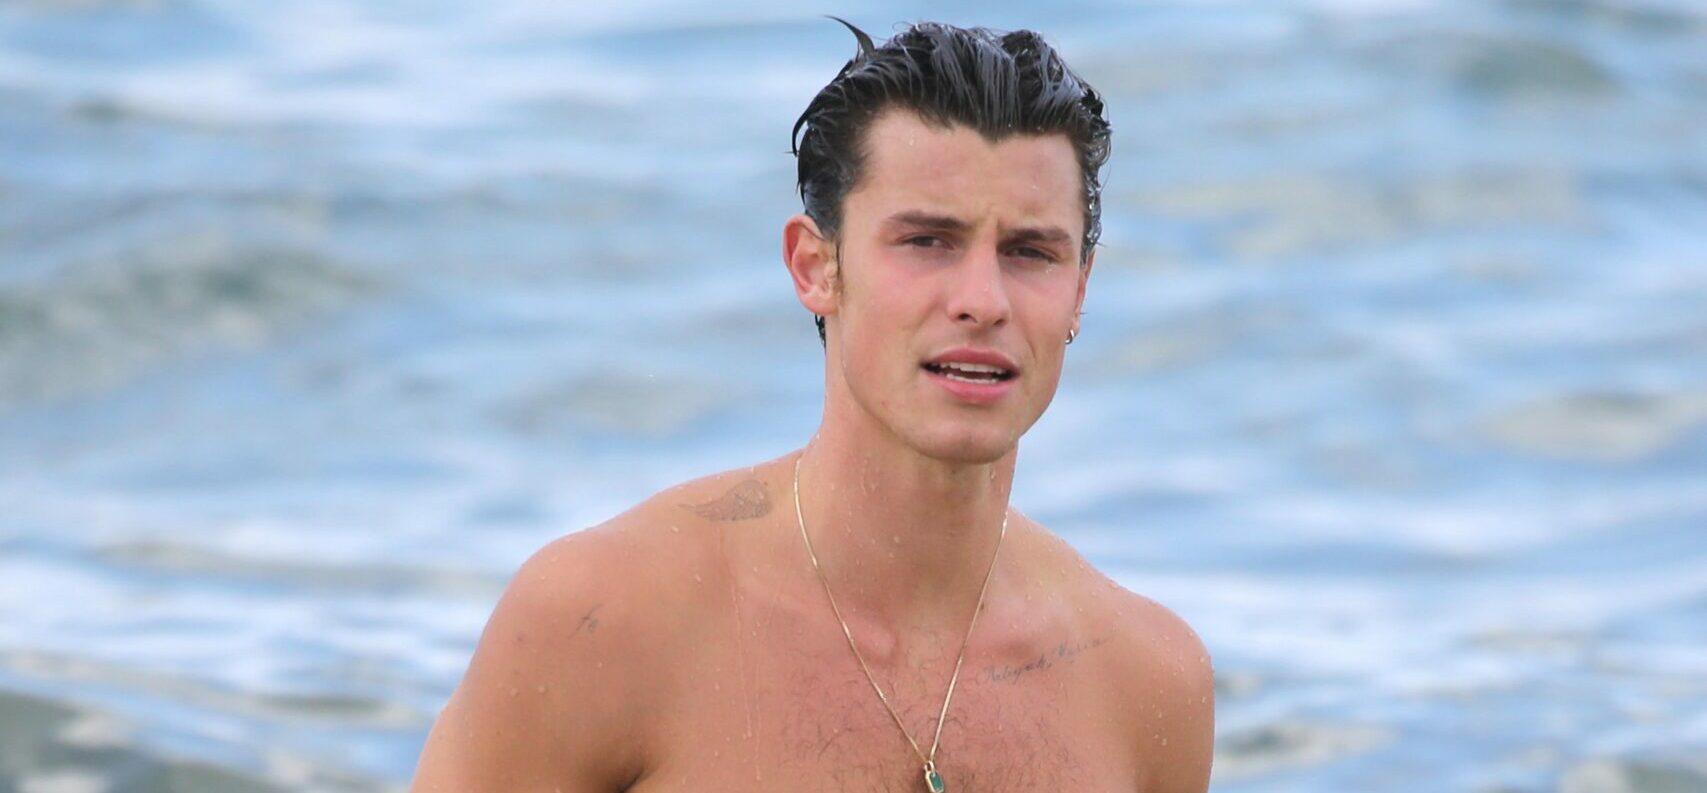 Shawn Mendes takes a dip in the ocean while in Miami